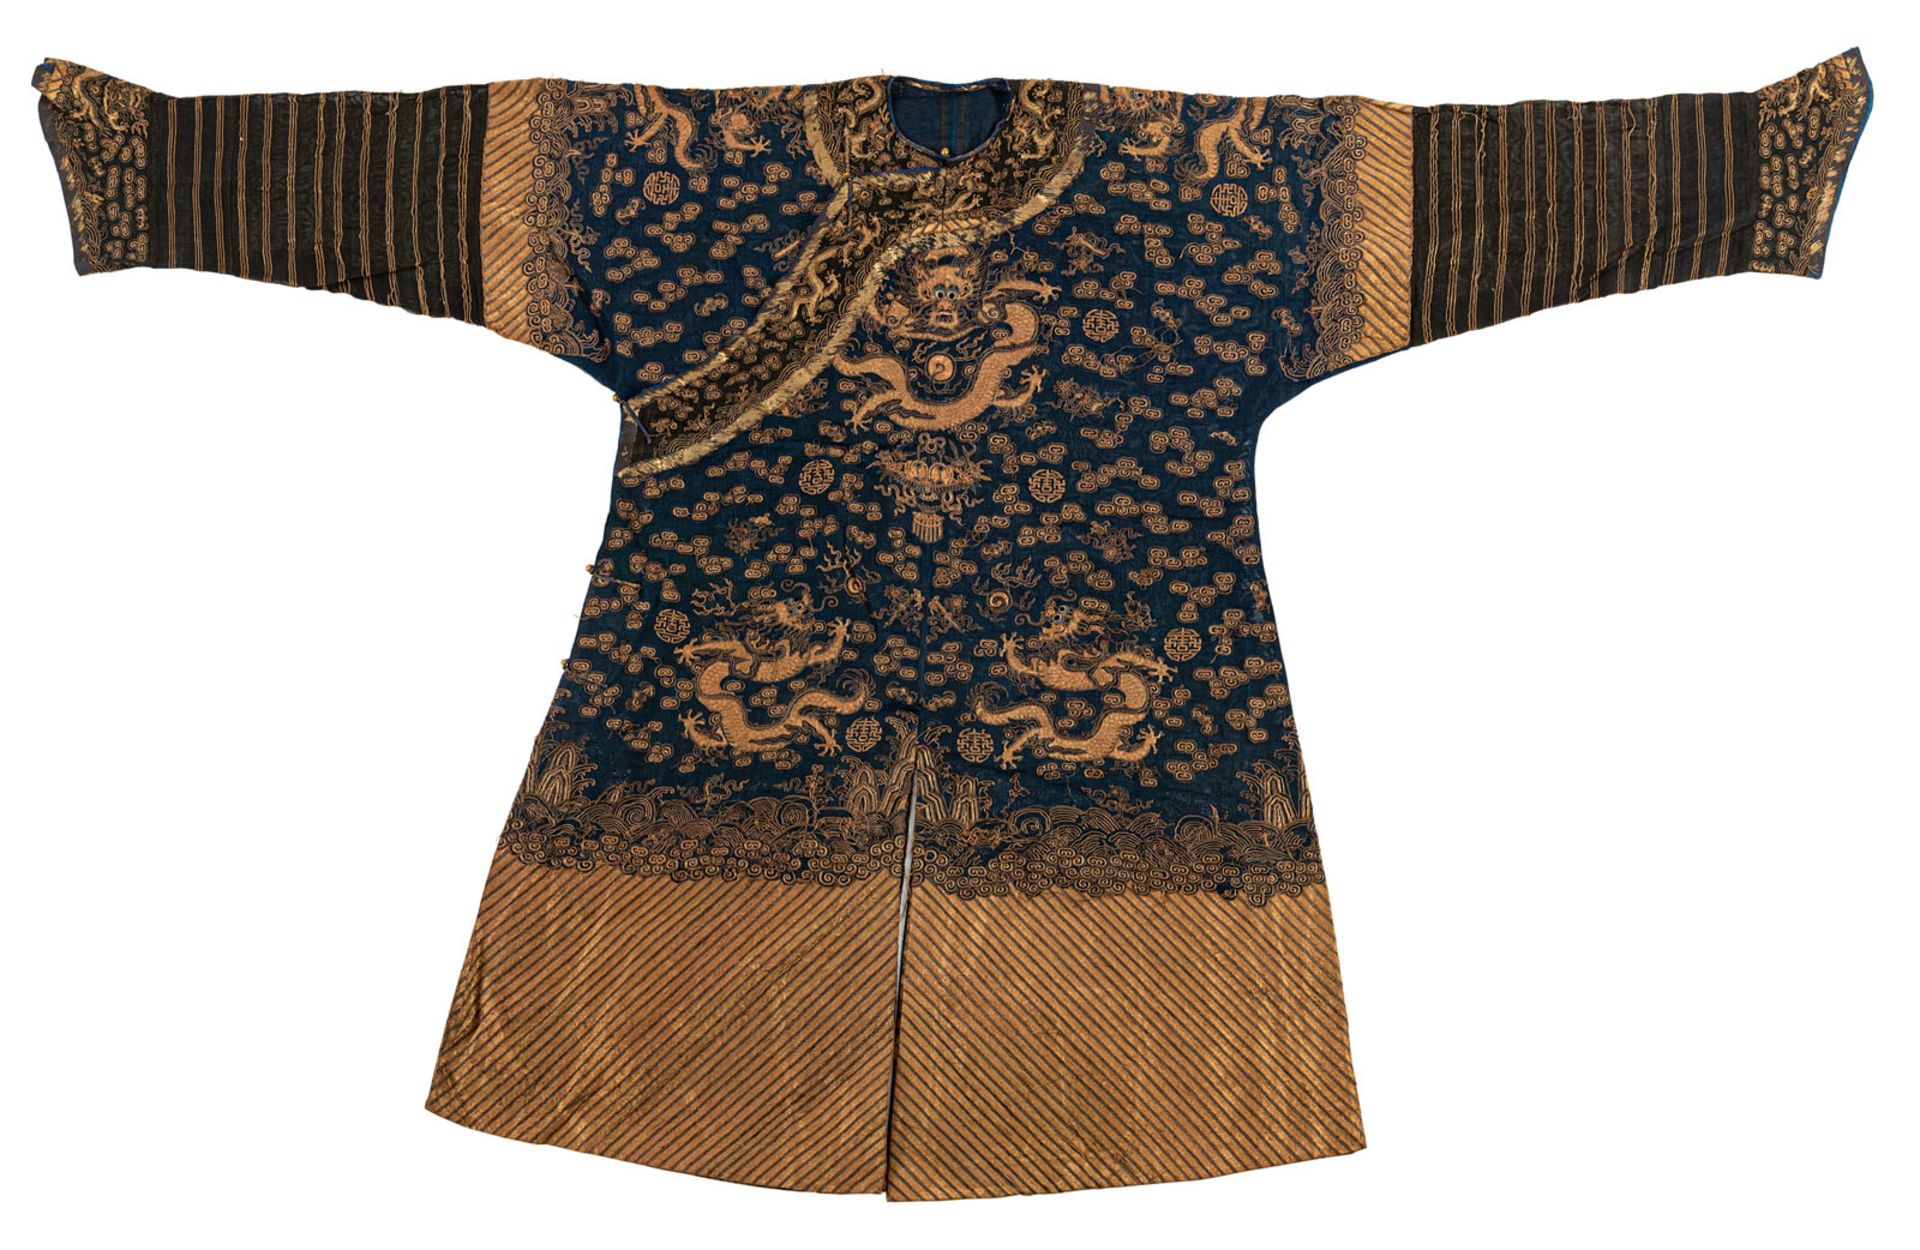 NAVY BLUE DRAGON ROBE (JIFU) IN SHA AND GOLD EMBROIDERY FOR A GENTLEMAN